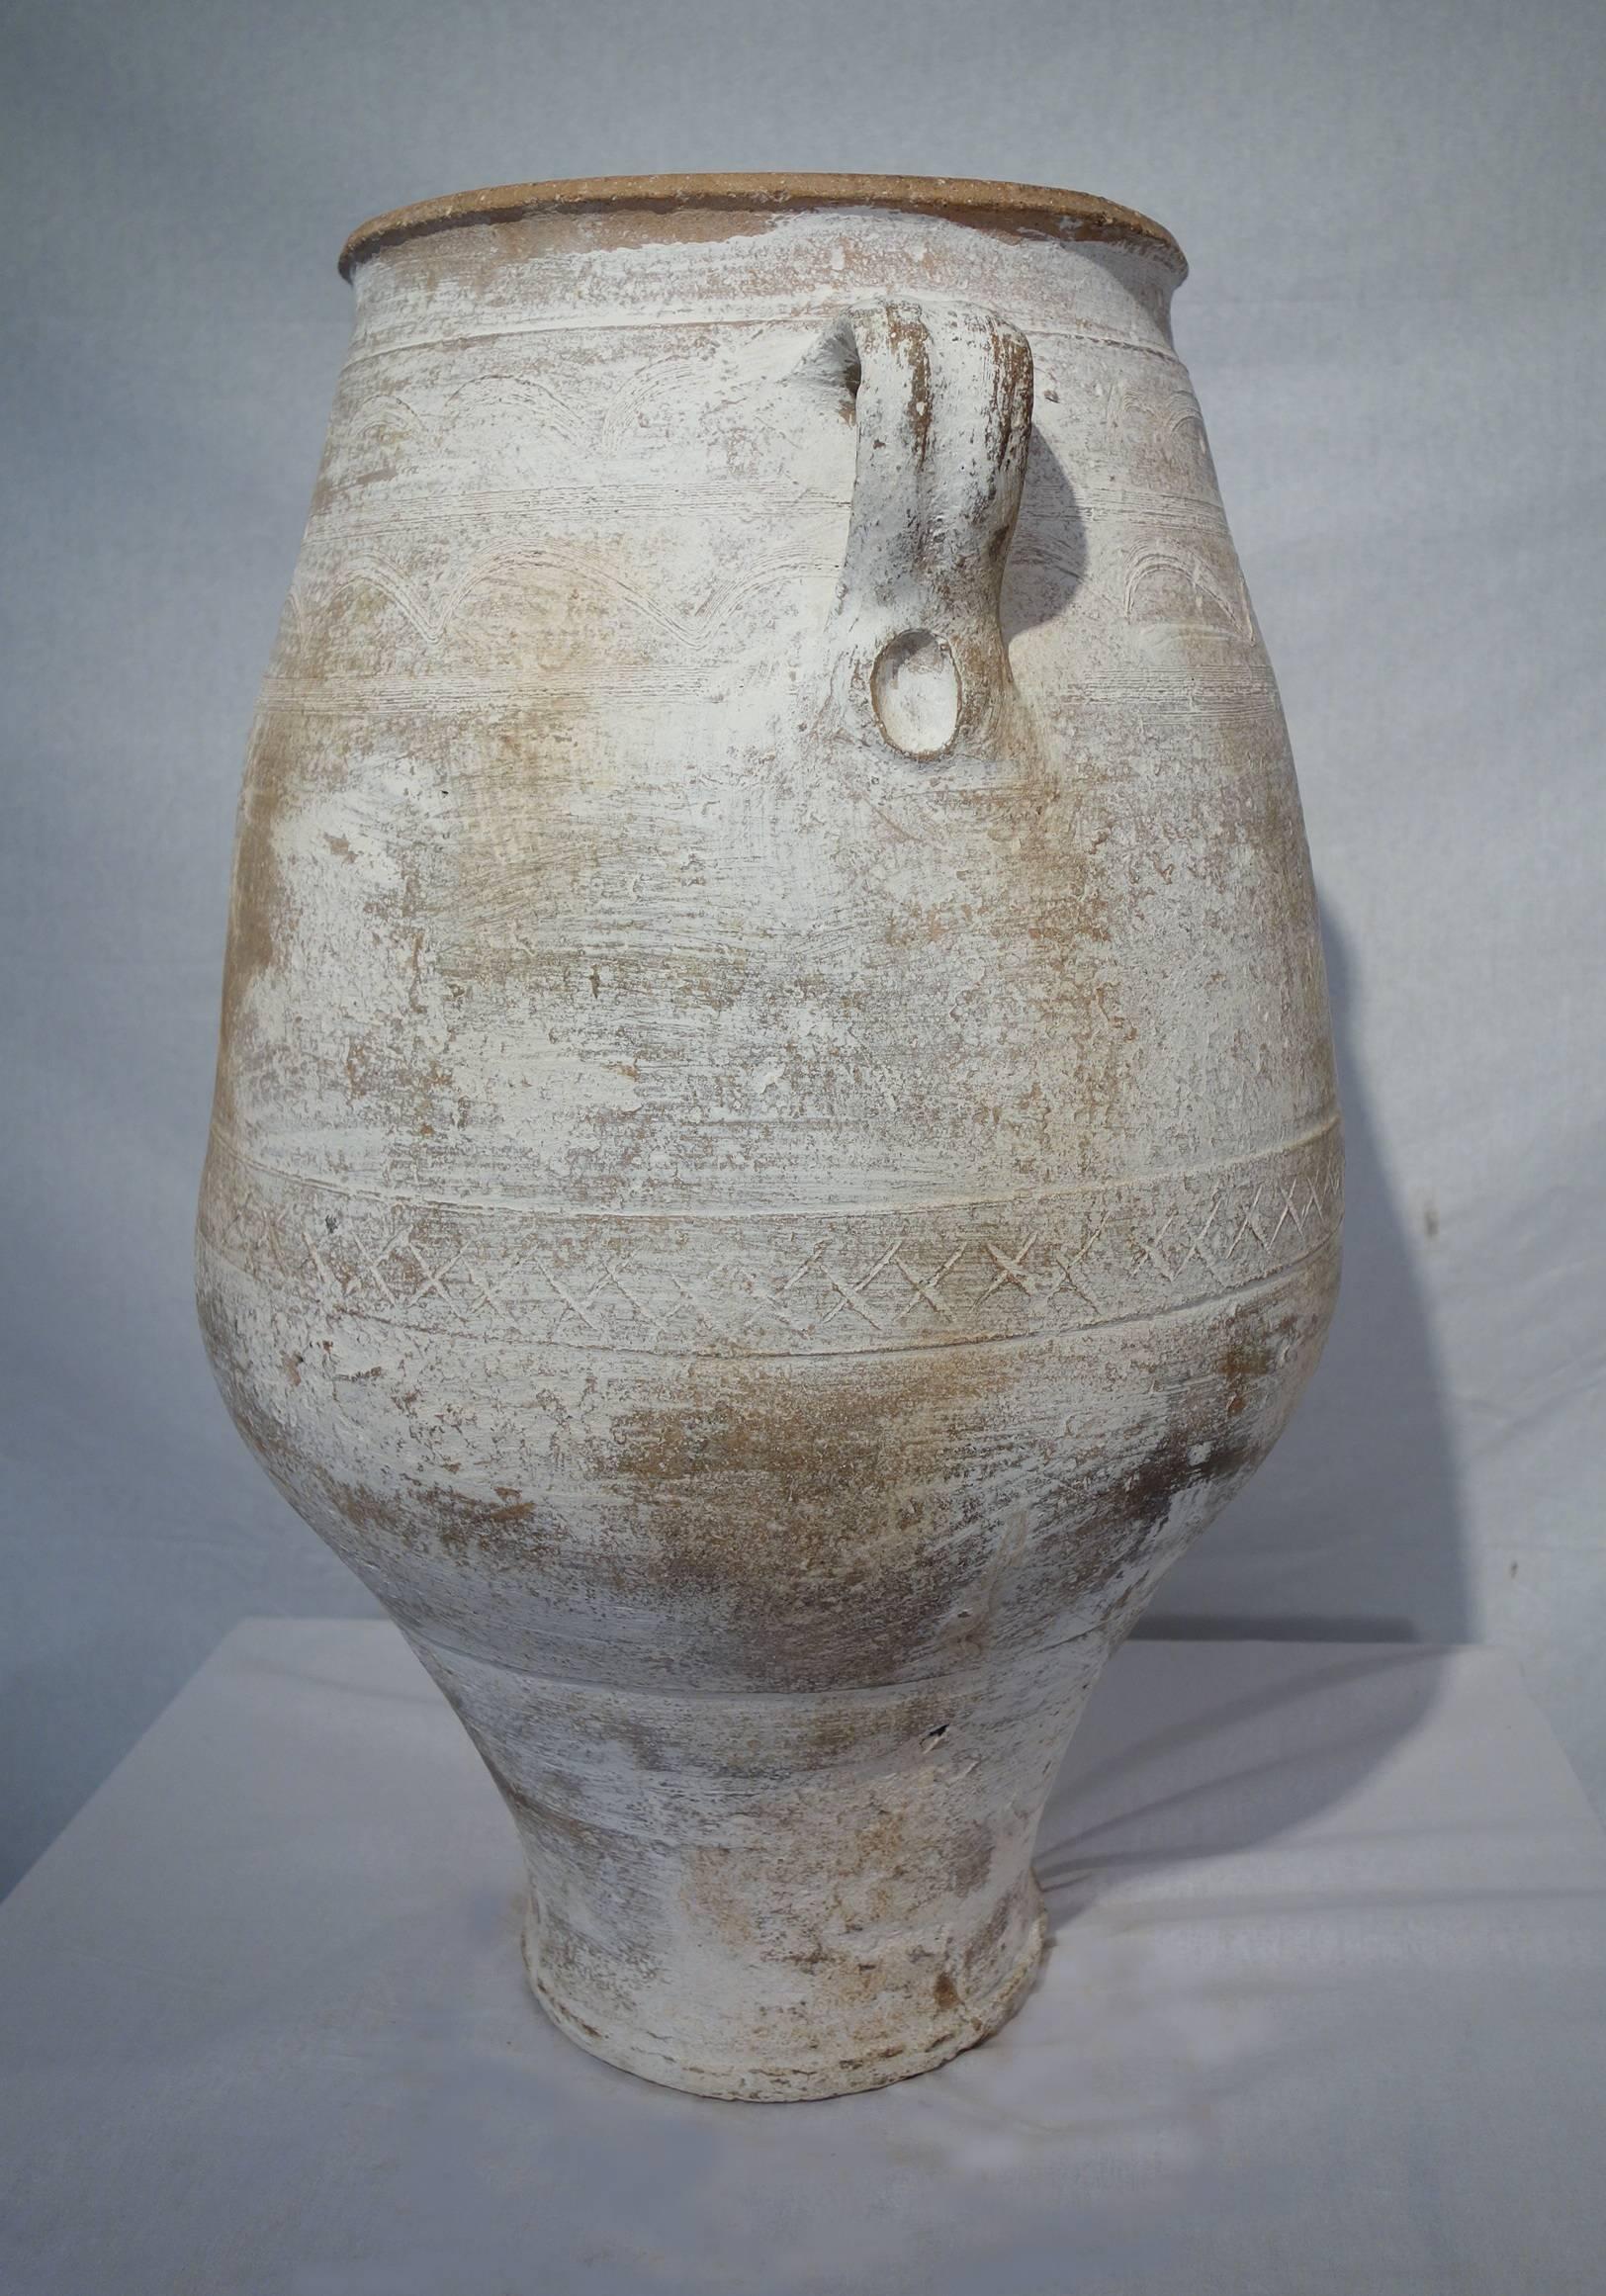 Classical Greek 19th Century Mediterranean Terracotta Amphora Jar with White Patina and Handles